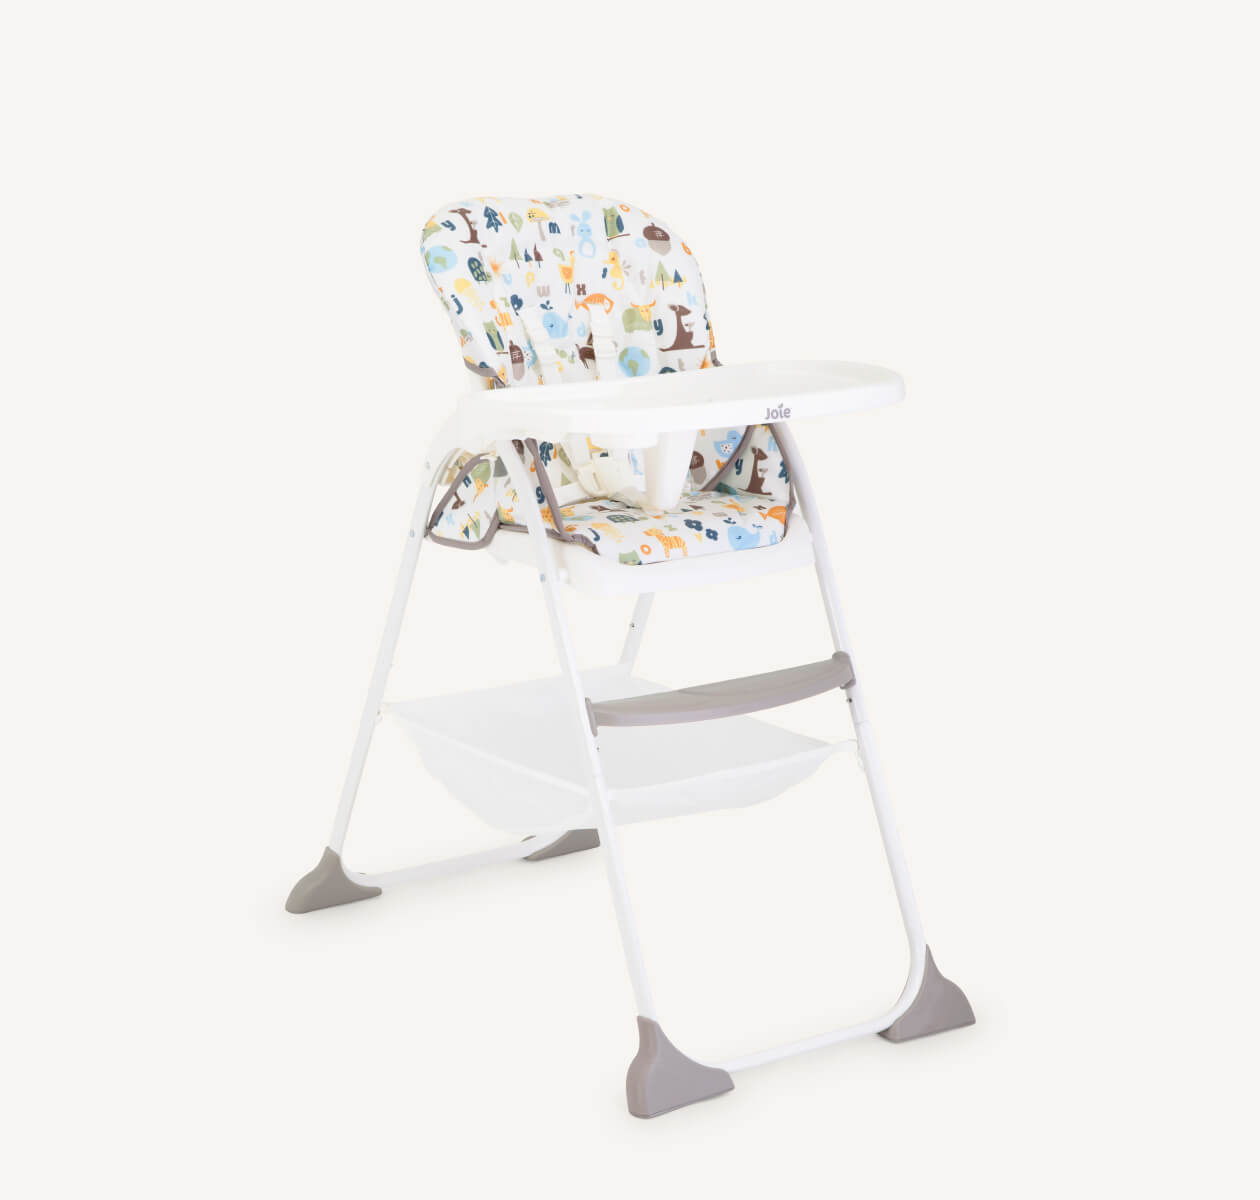 The Joie highchair mimzy Snacker in a multi-color print featuring woodland animals and plants from a right angle. 